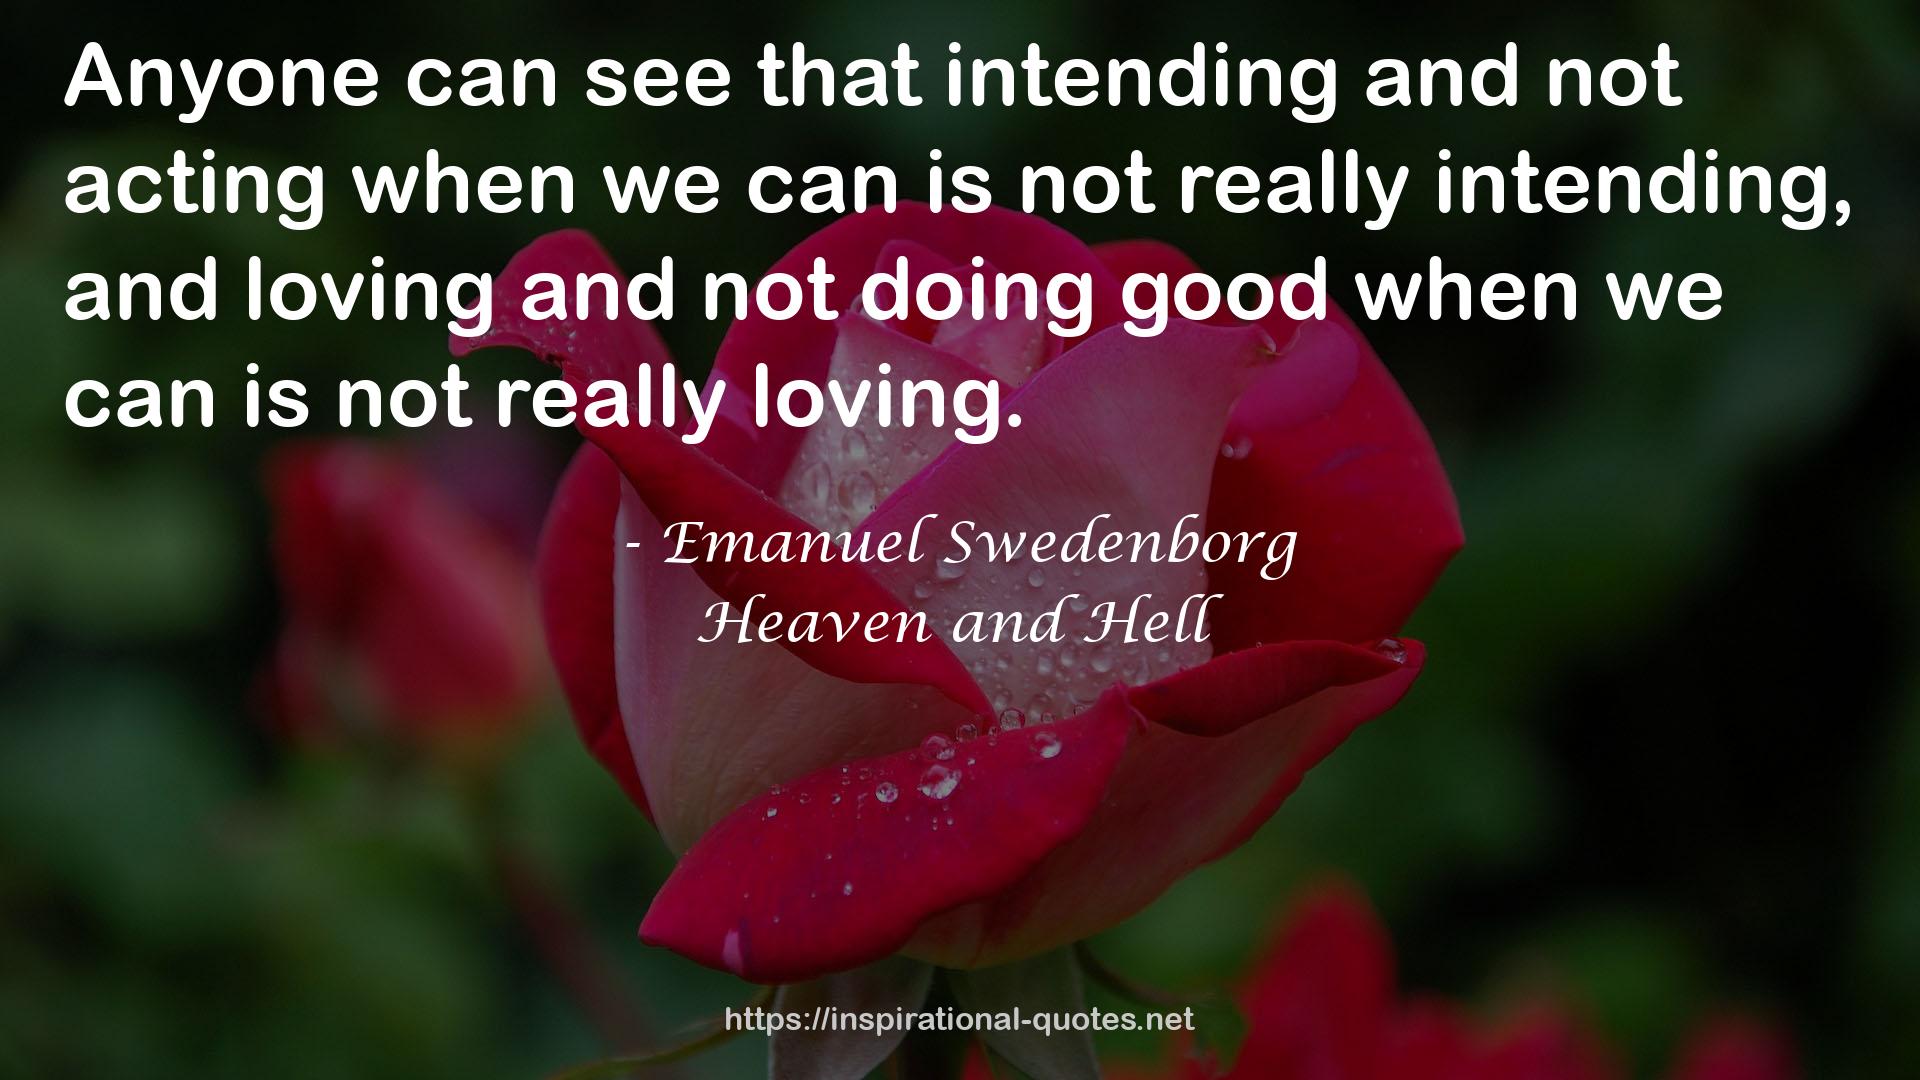 Heaven and Hell QUOTES